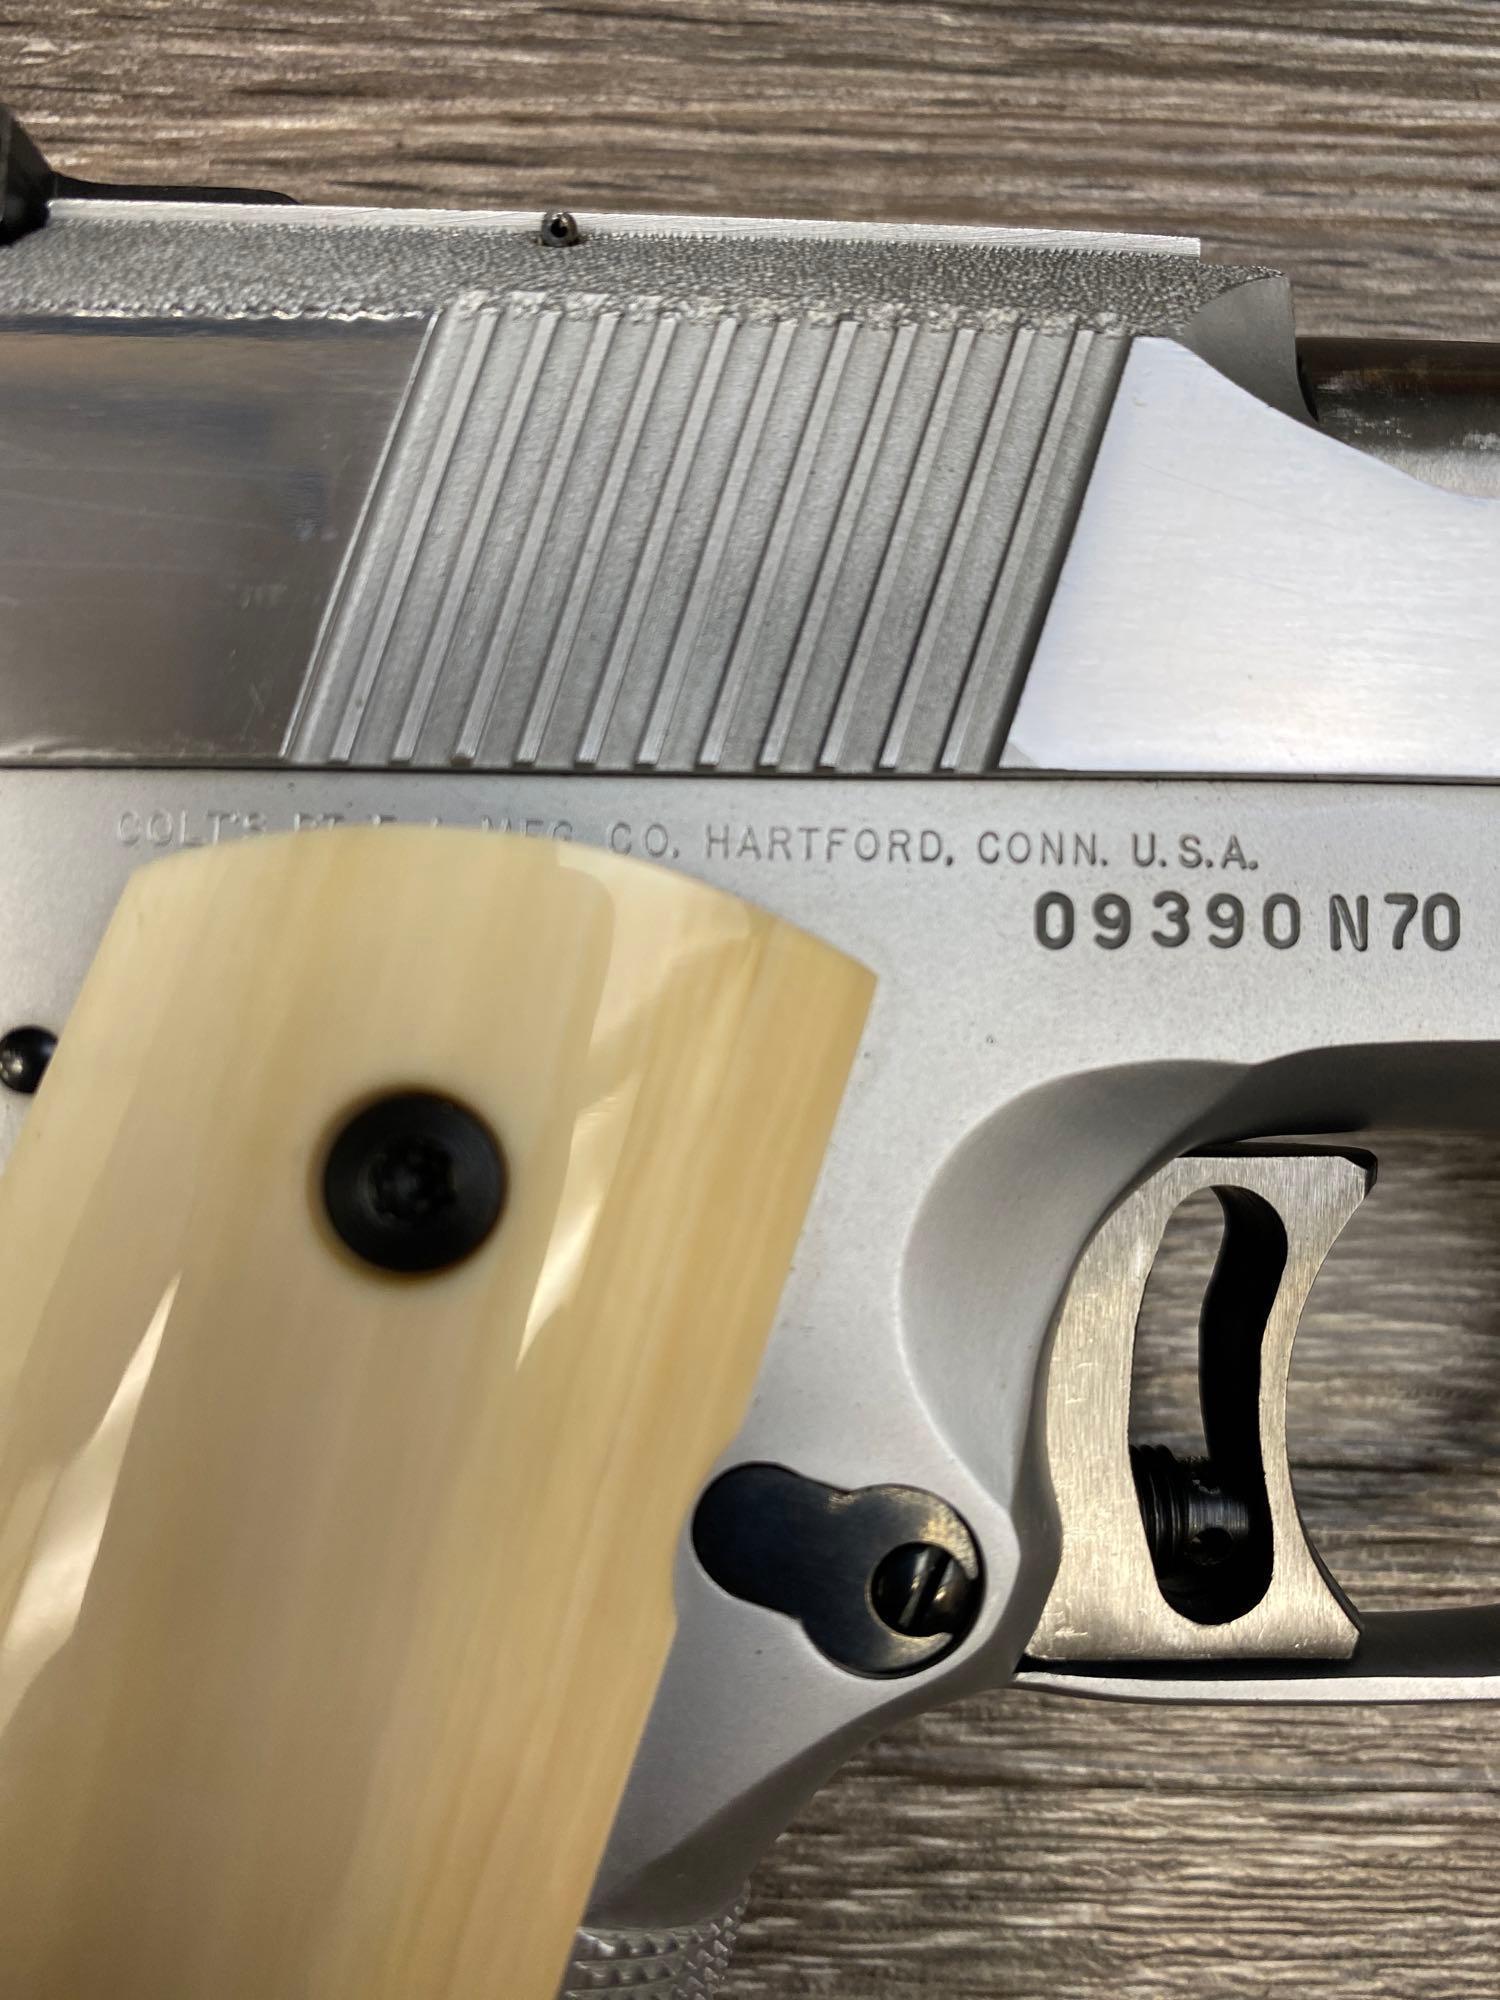 CASED COLT 1911 STAINLESS GOLD CUP NATIONAL MATCH .45 SEMI-AUTO PISTOL